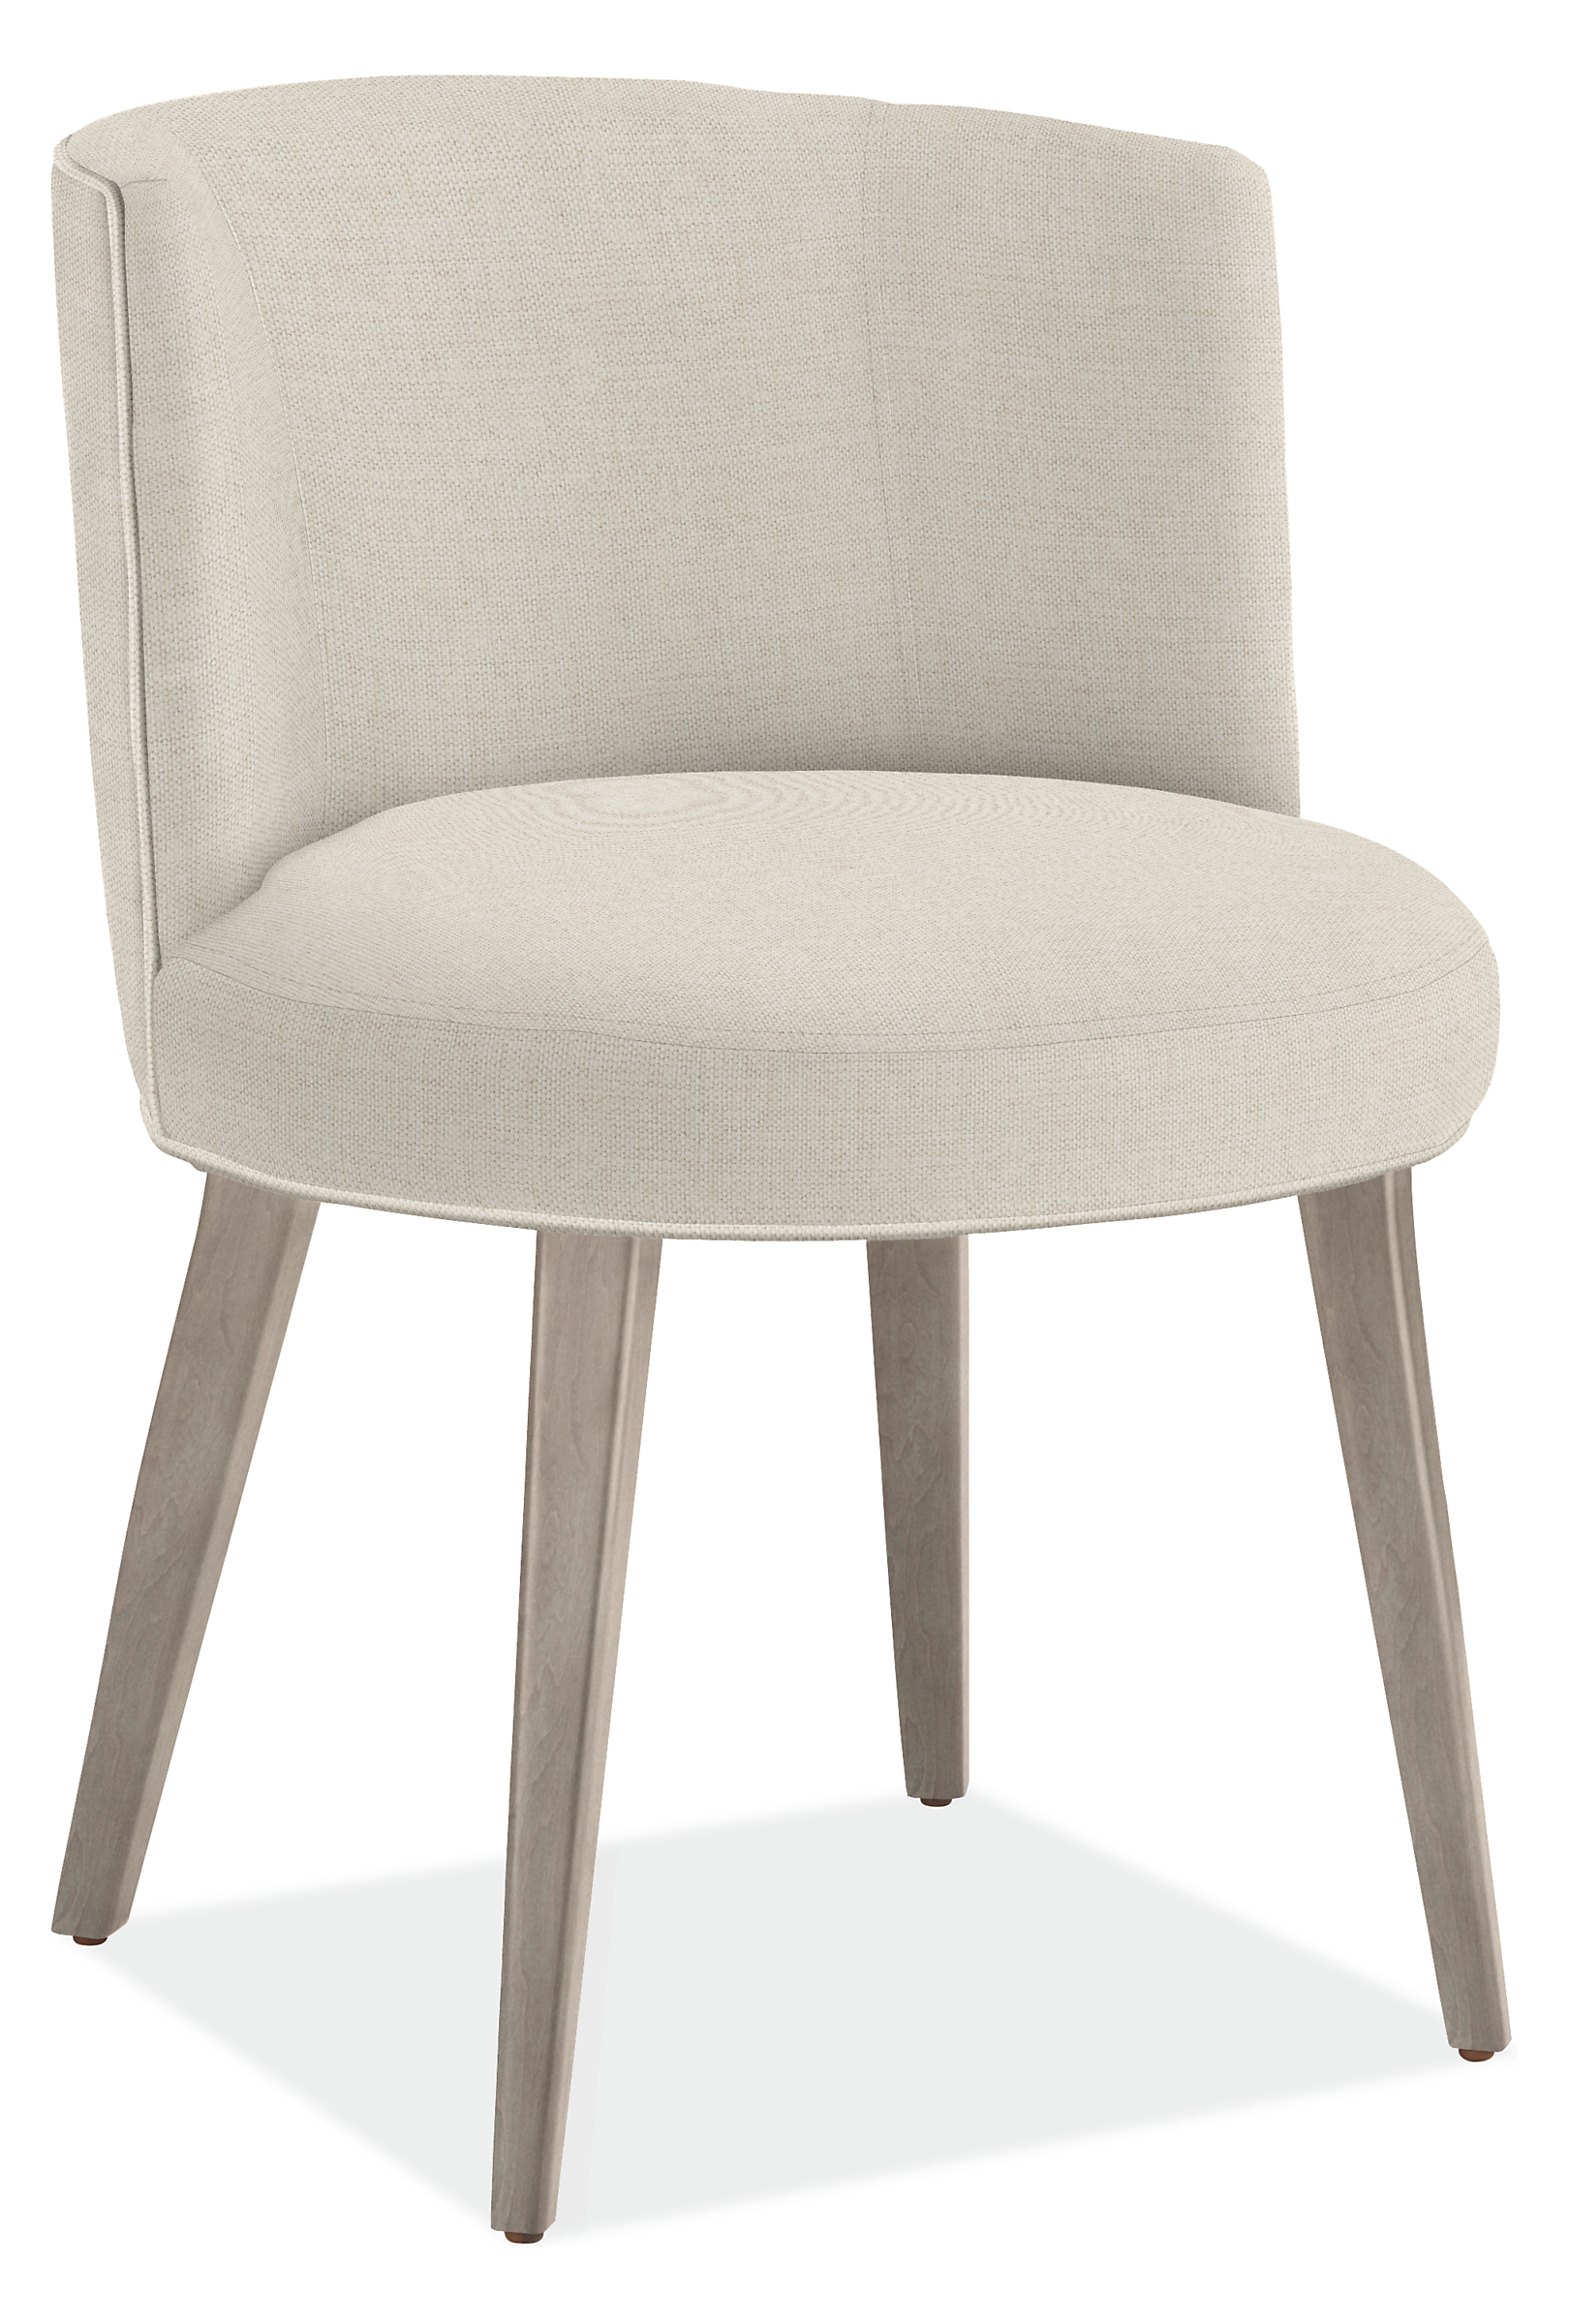 June Side Chair in Sumner Ivory with Shell Legs